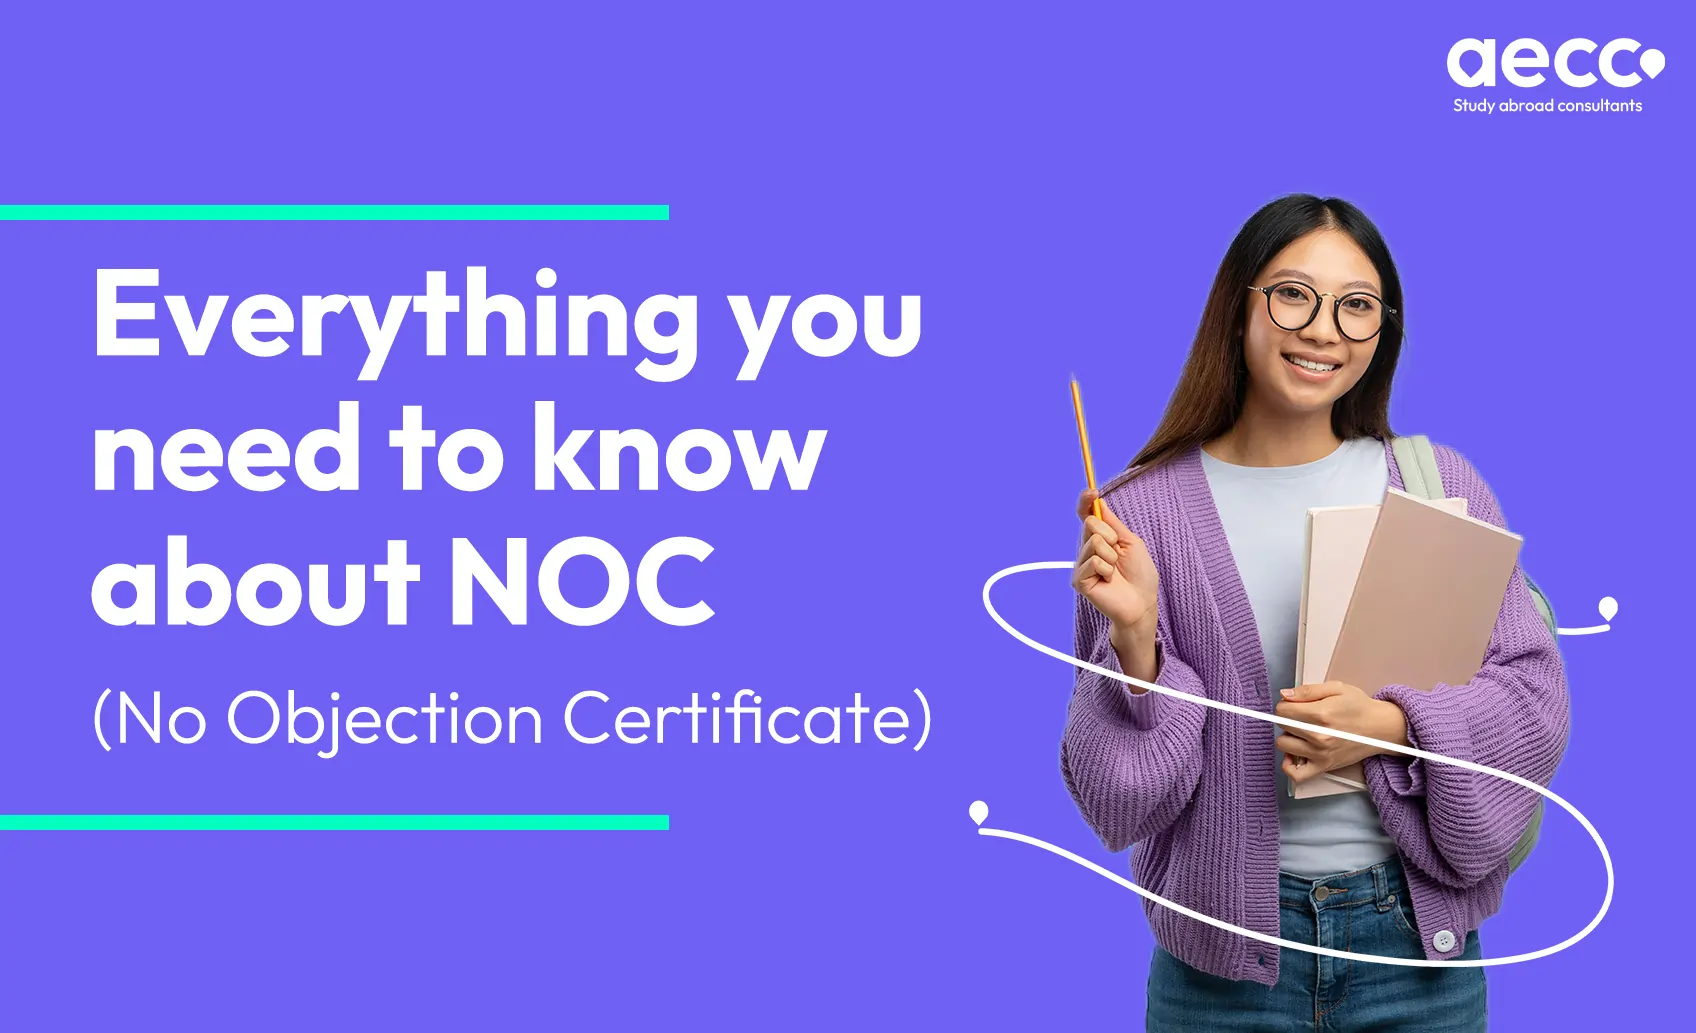 NOC-no-objection-certificate